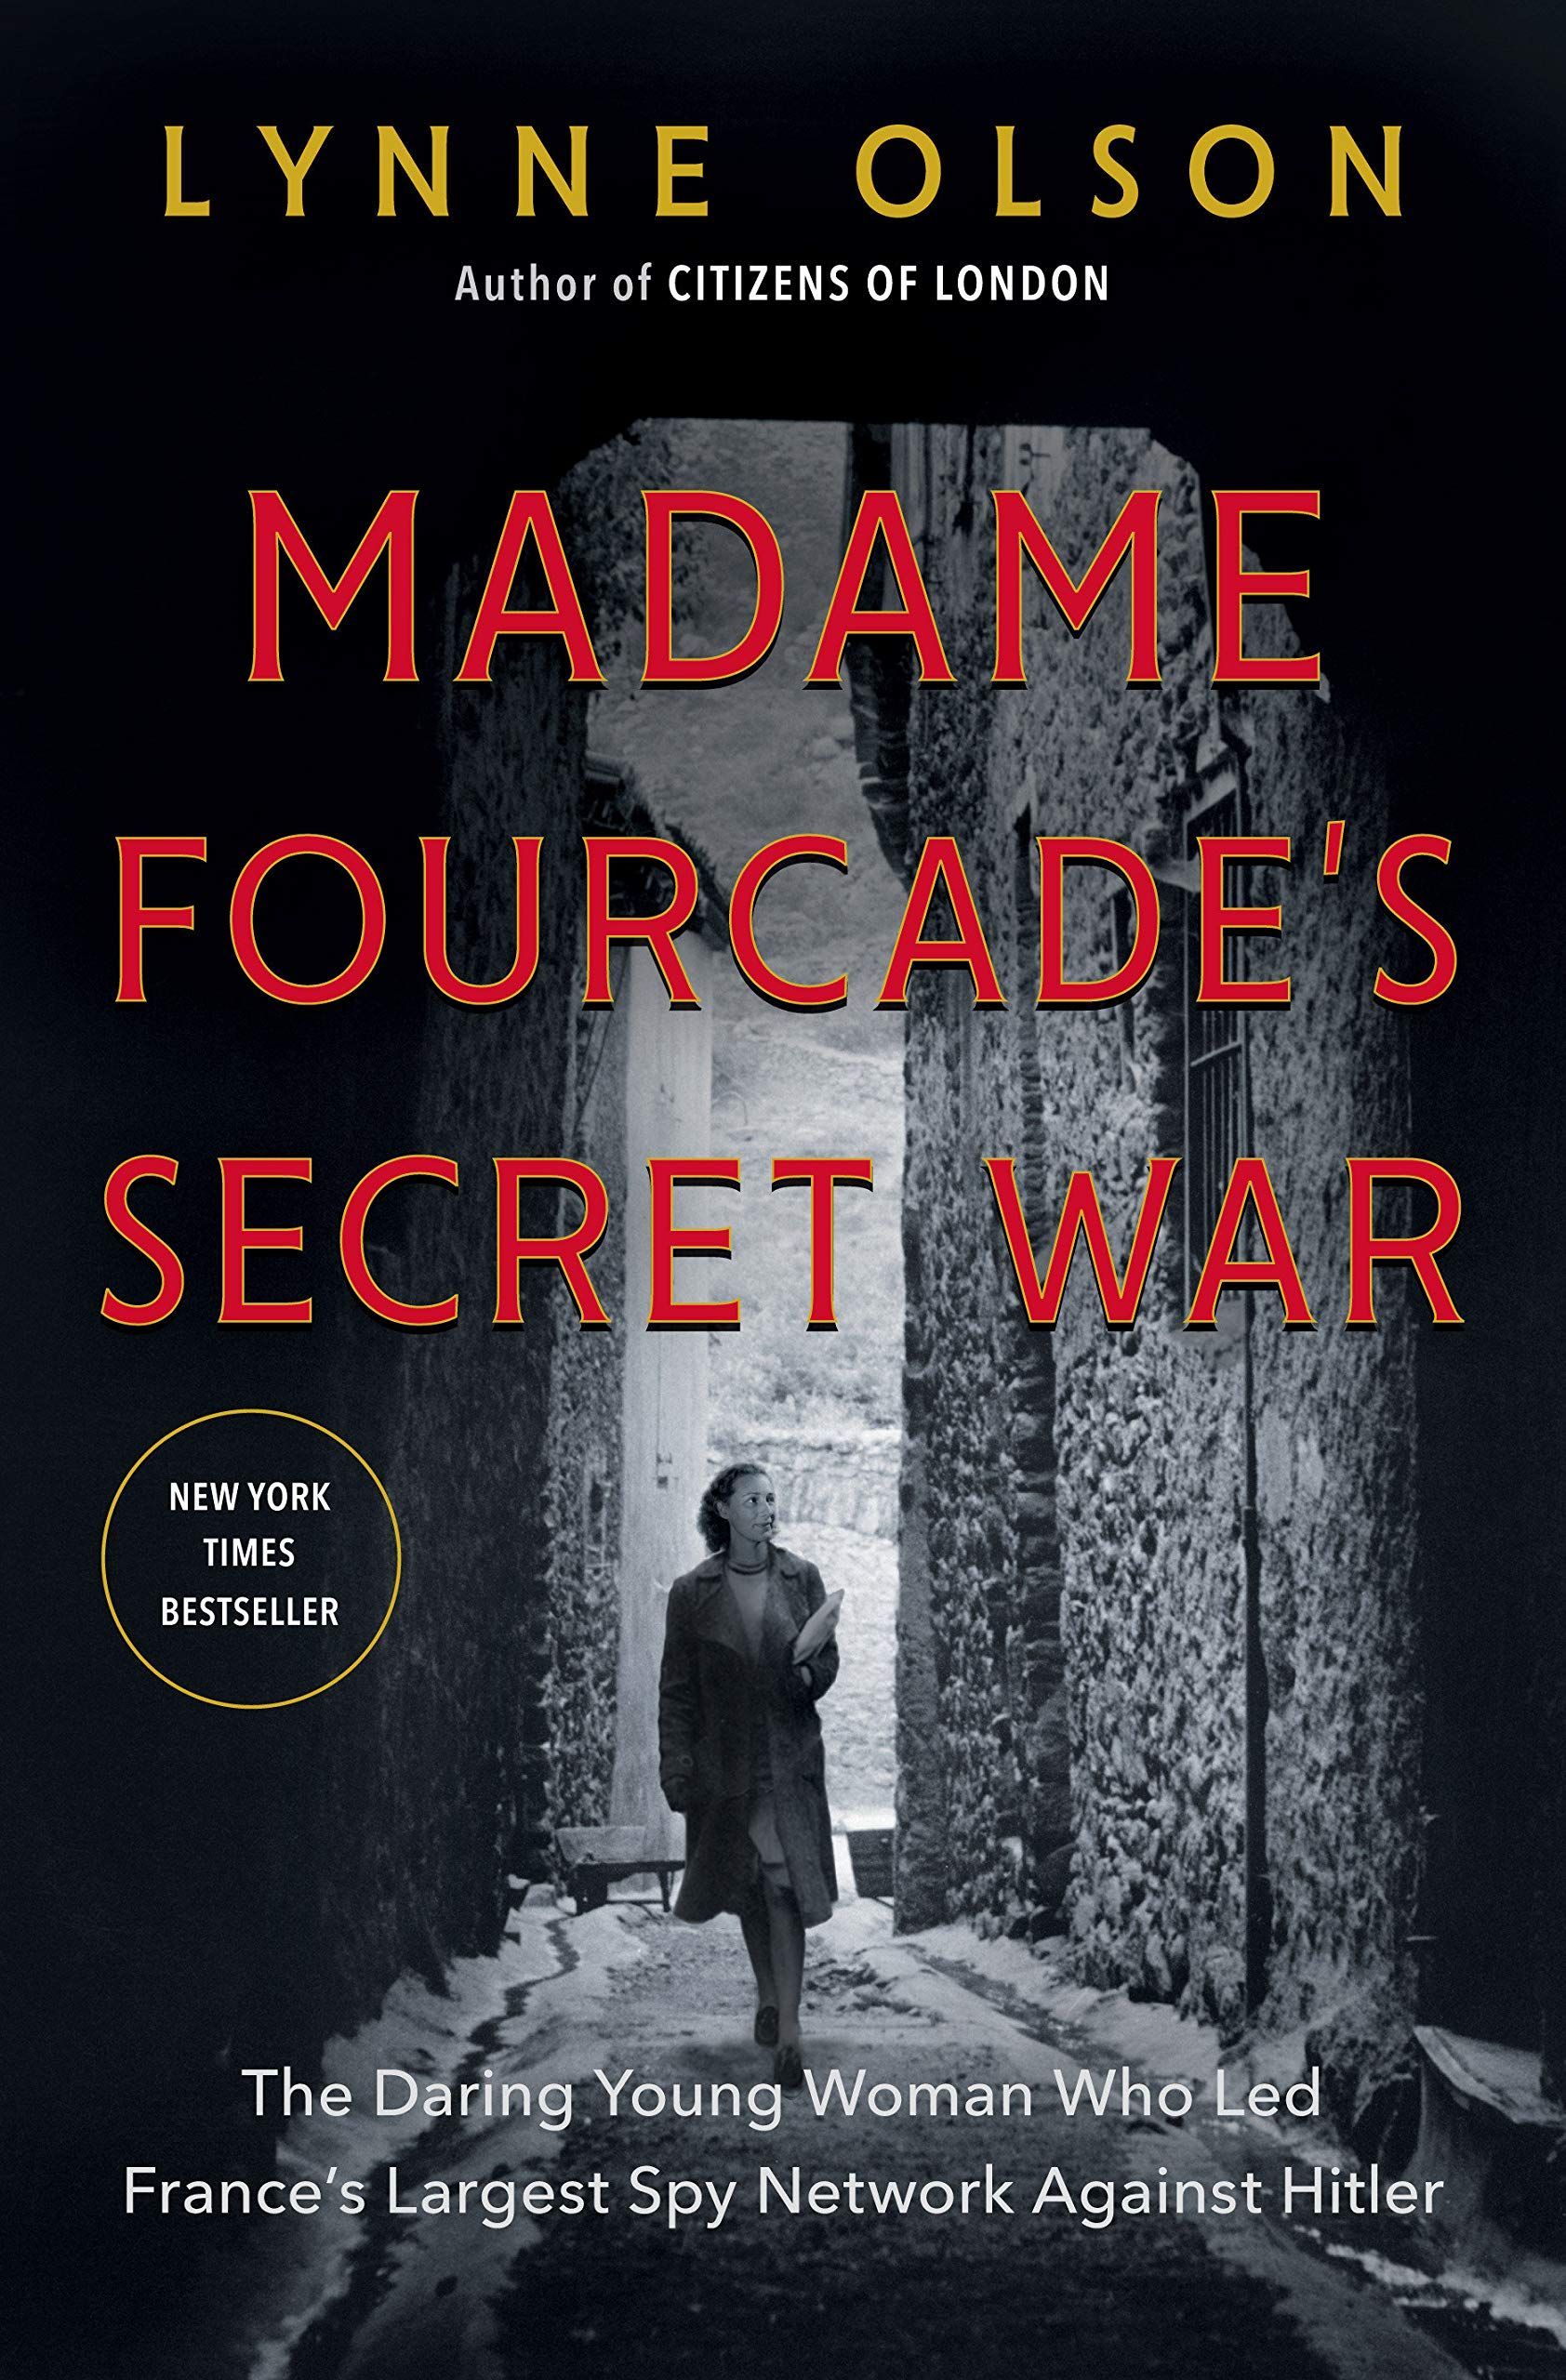 Resistance Is a State of Mind: On Lynne Olson’s “Madame Fourcade’s Secret War: The Daring Young Woman Who Led France’s Largest Spy Network Against Hitler”